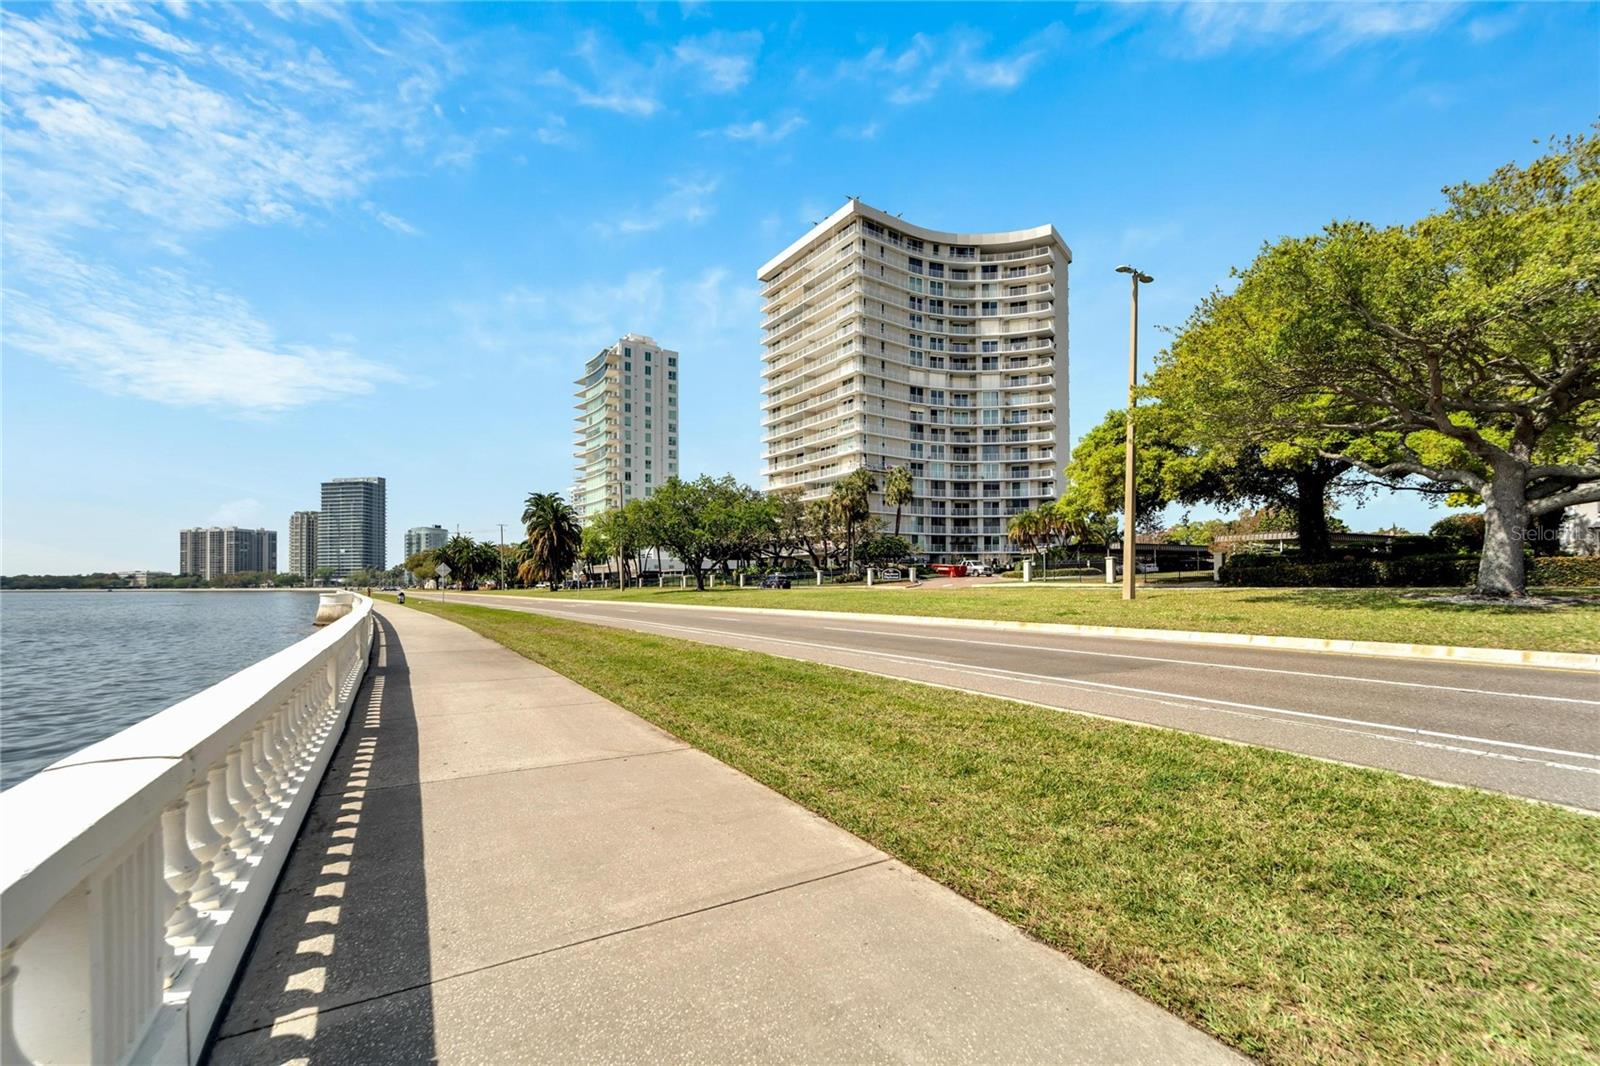 bAYSHORE BLVD SIDEWALK IS THE WORLD'S LONGEST AT 4.3 MILES ALONG THE WATER!